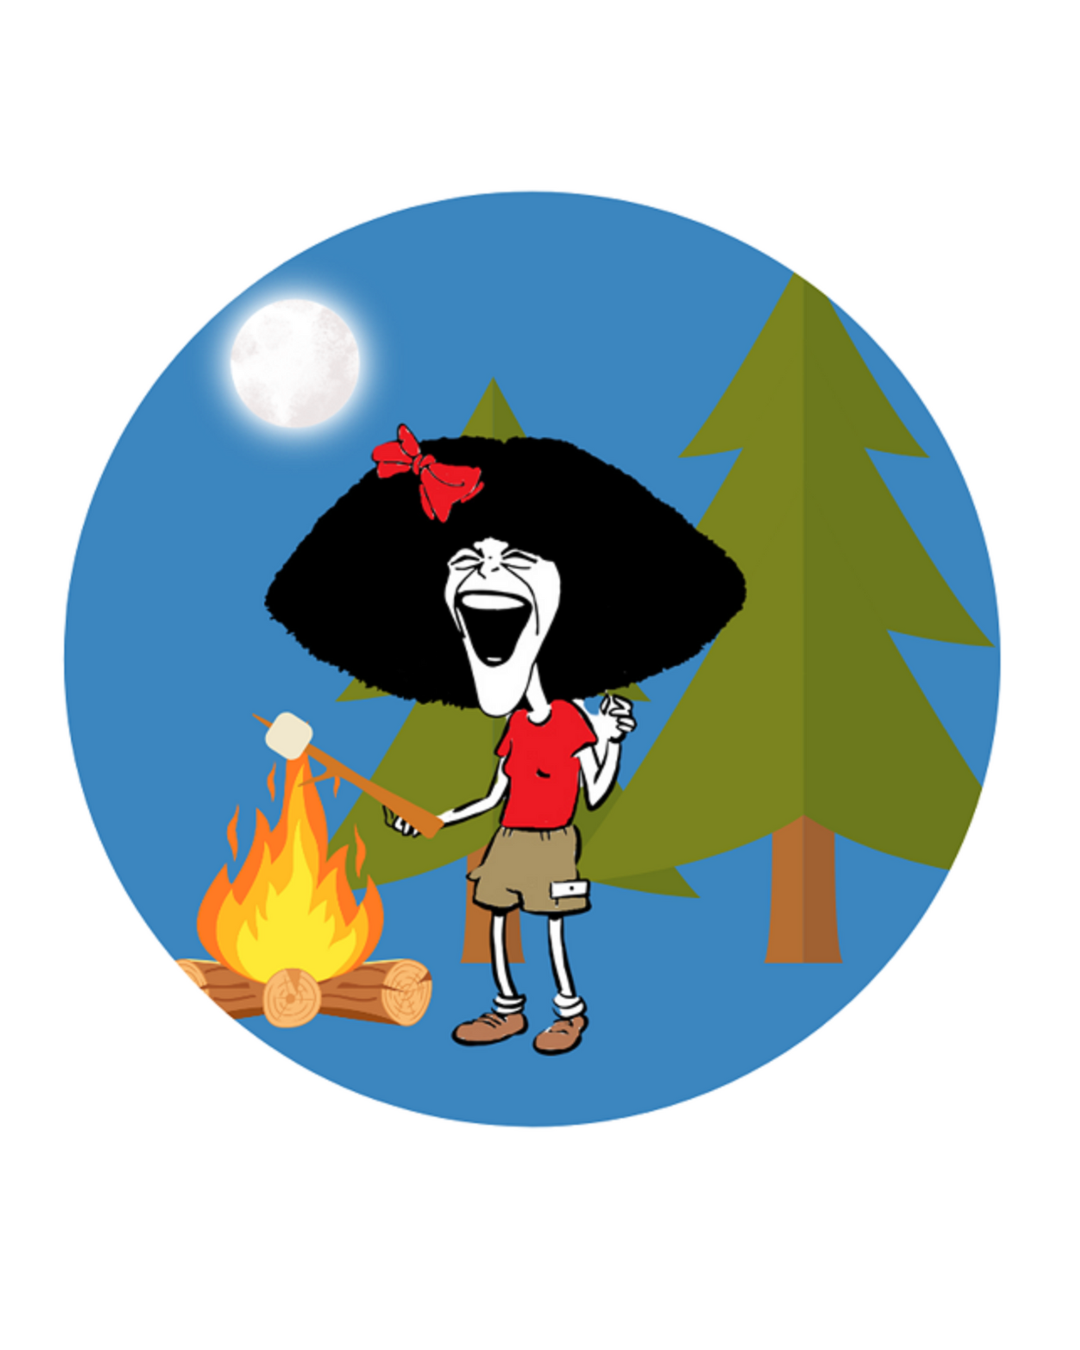 A cartoon of Gilda Radner roasting a marshmallow over a fire in front of 2 pine trees.